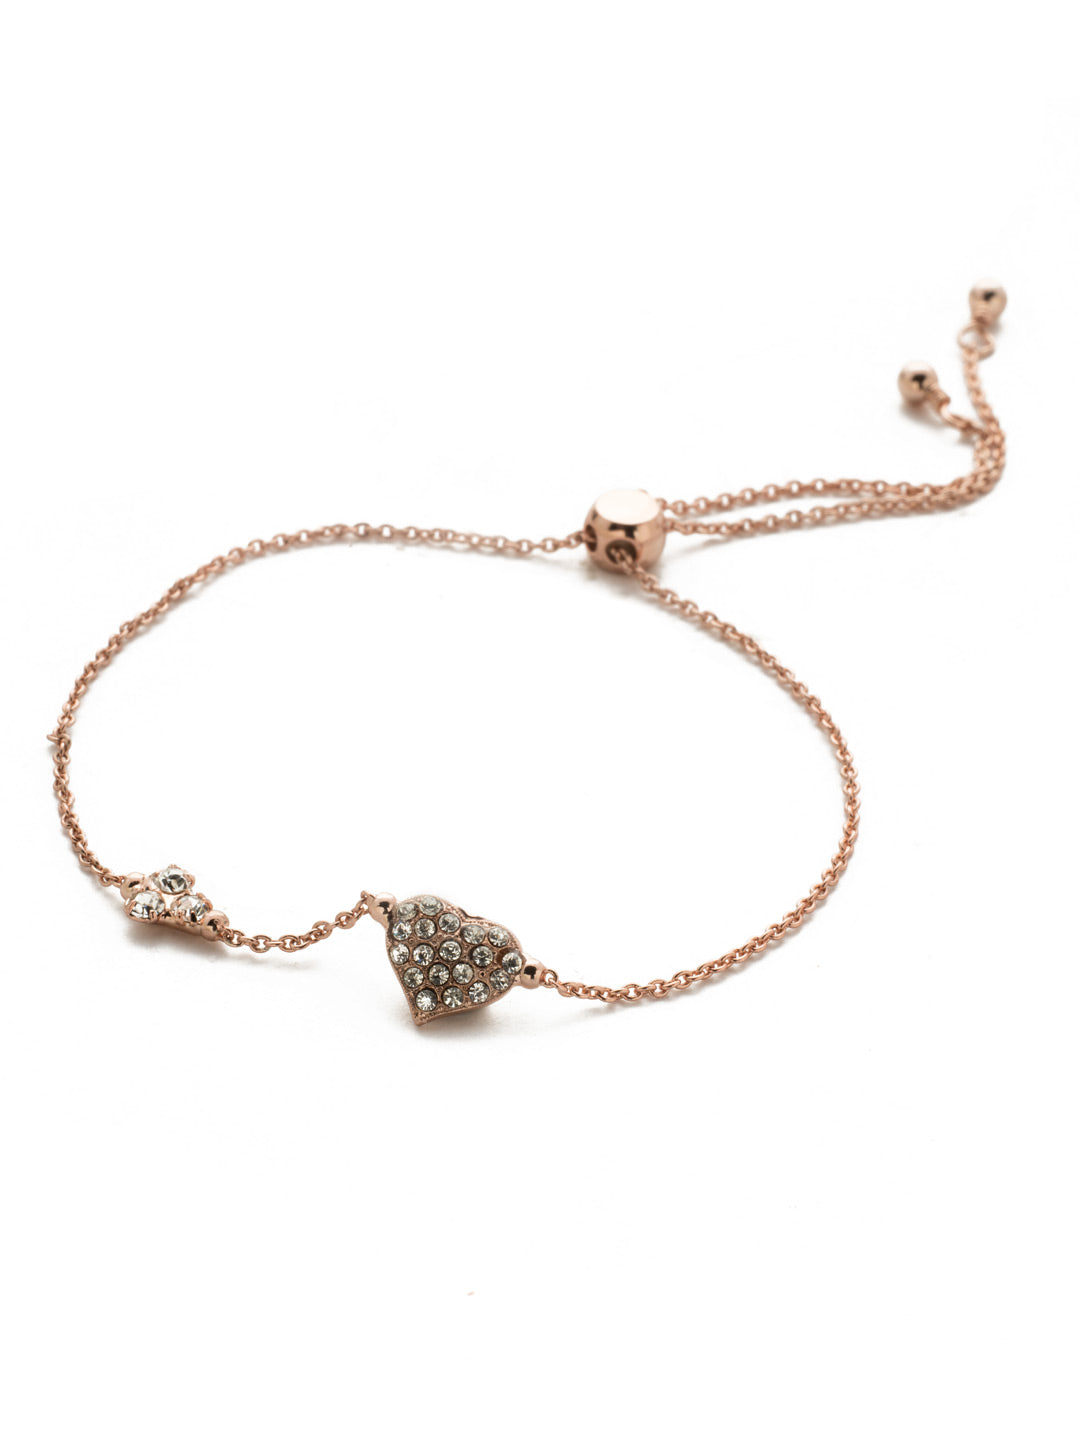 Vevina Slider Bracelet - BEM2RGCRY - <p>A heart shape and shimmering stones combine in a slider that complements every outfit. It's cute. It's classy. It's a must-have. From Sorrelli's Crystal collection in our Rose Gold-tone finish.</p>